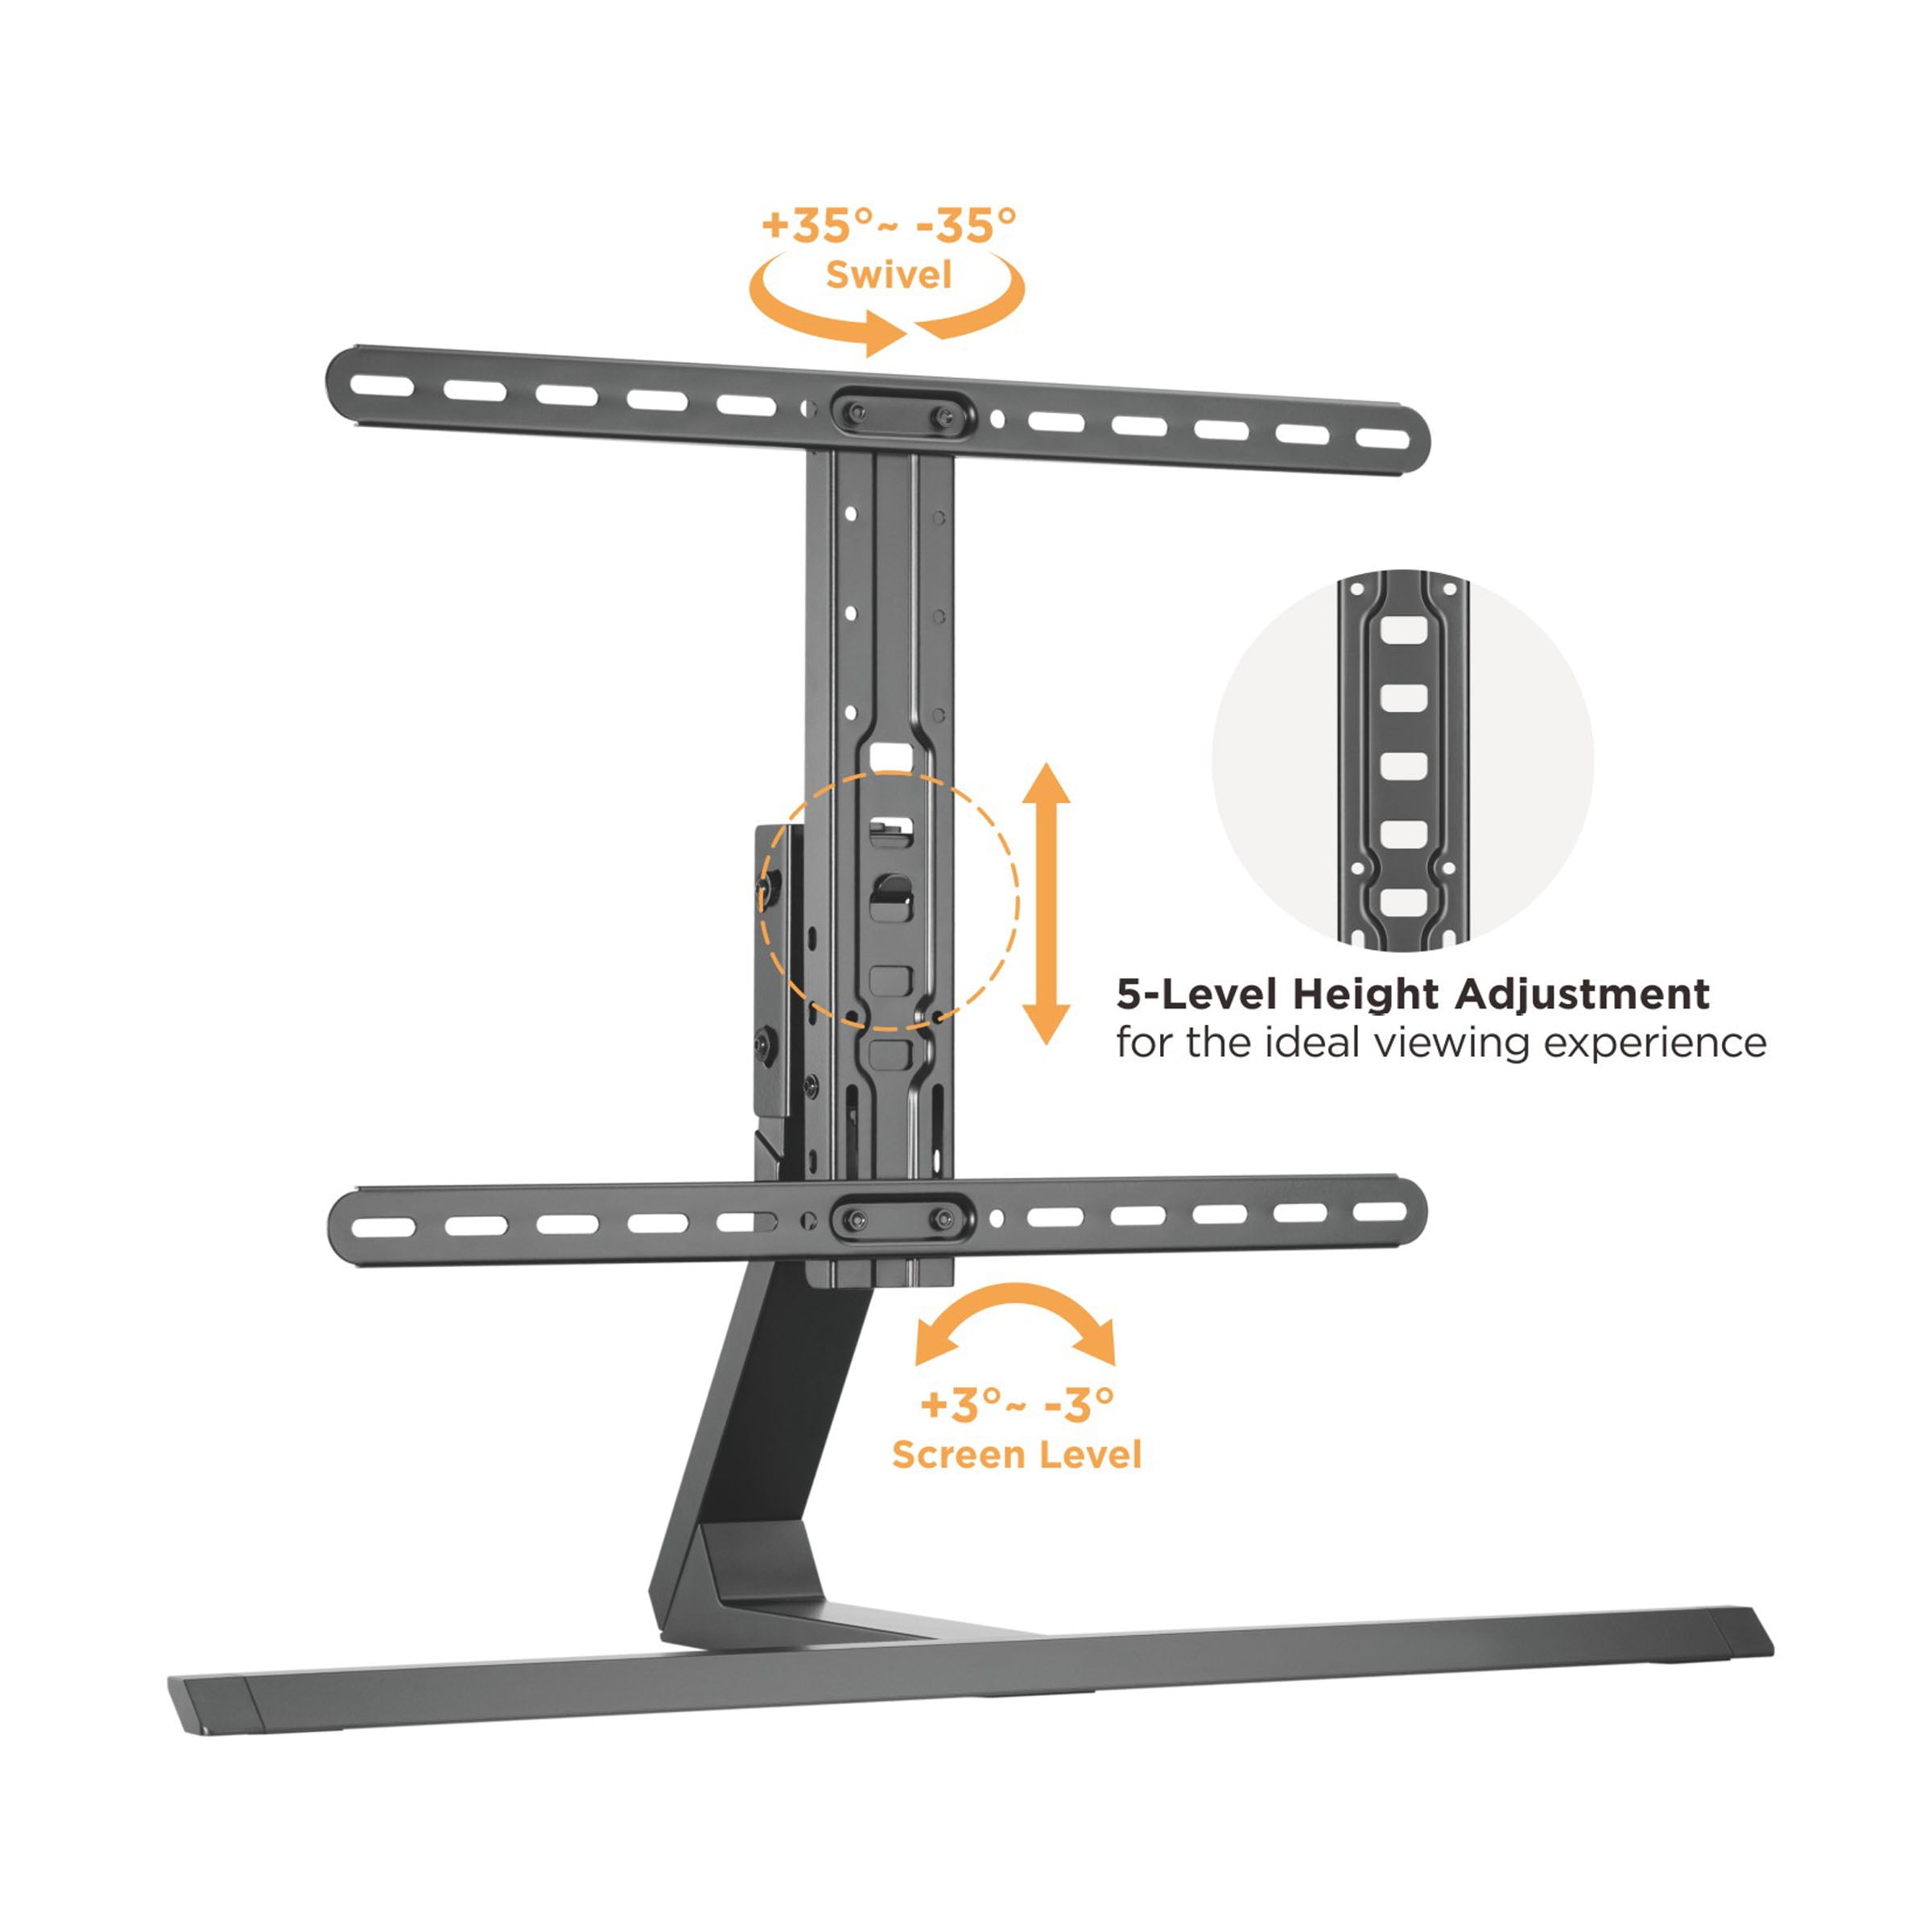 Atlantic Contemporary Universal Table Top TV Mount Stand for 37-75” TVs, Swivel, Tilt, and Height Adjustable